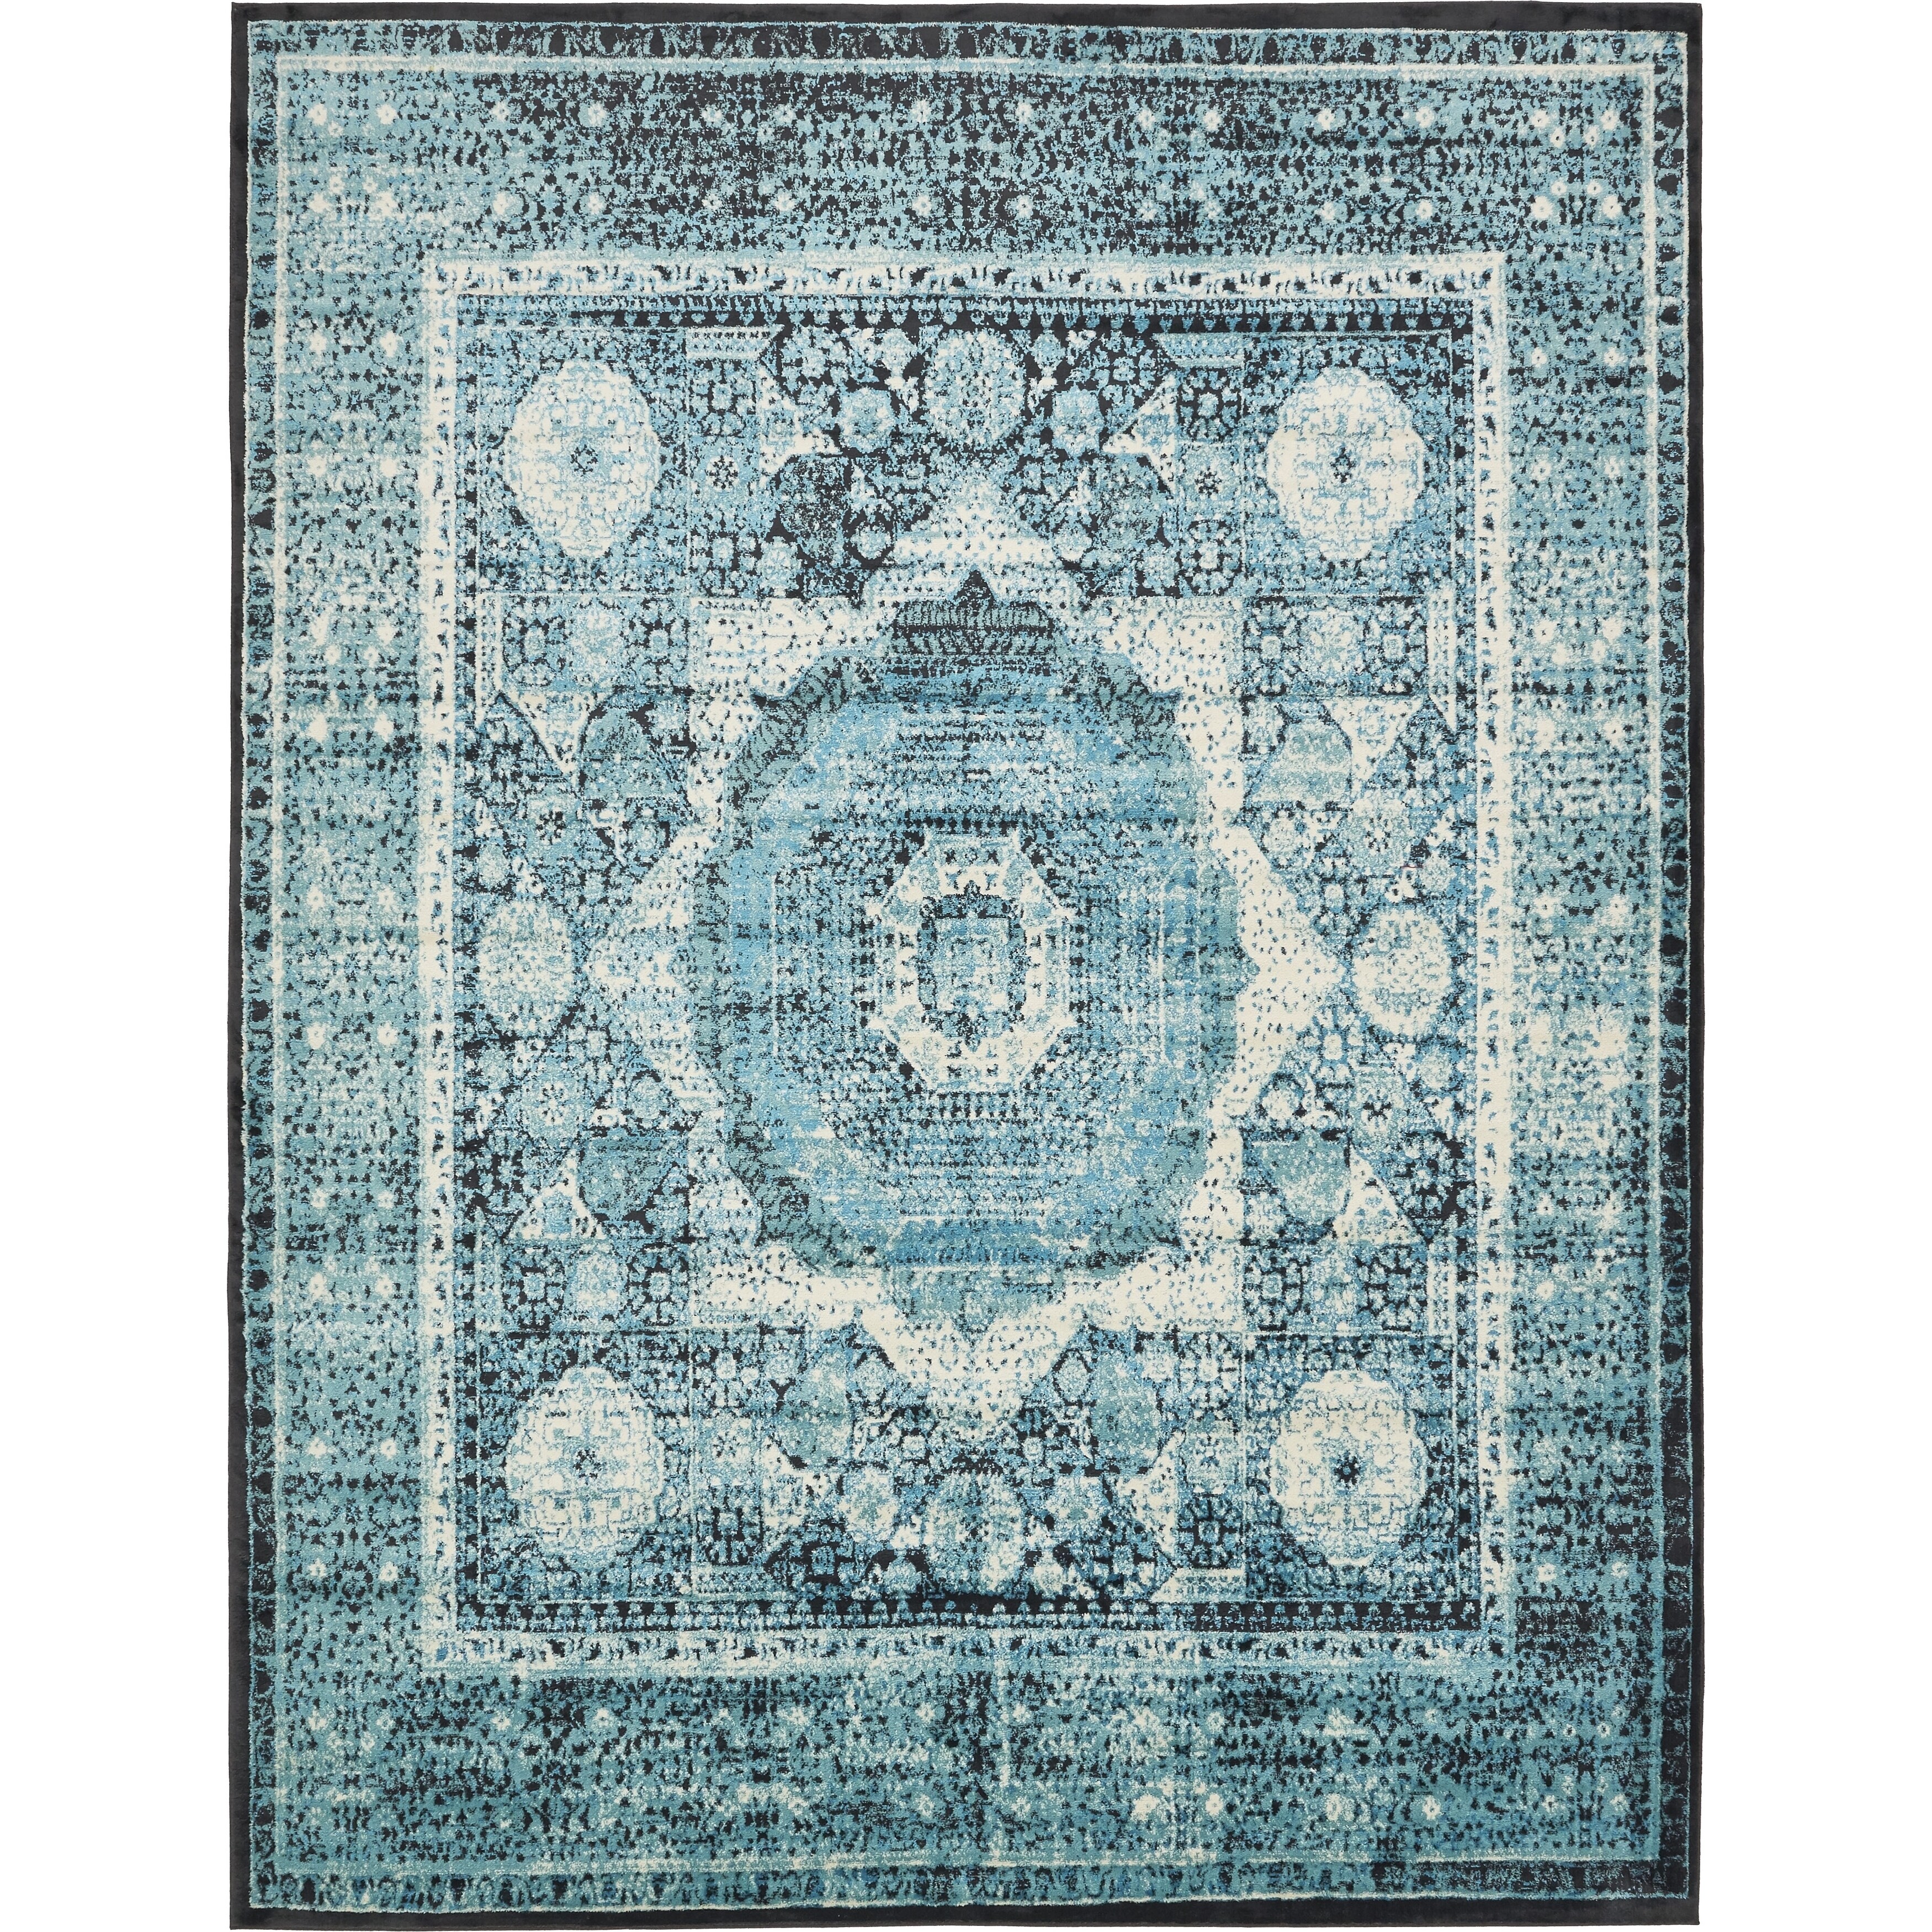 Buy Blue Outdoor Area Rugs Online At Overstockcom Our Best Rugs